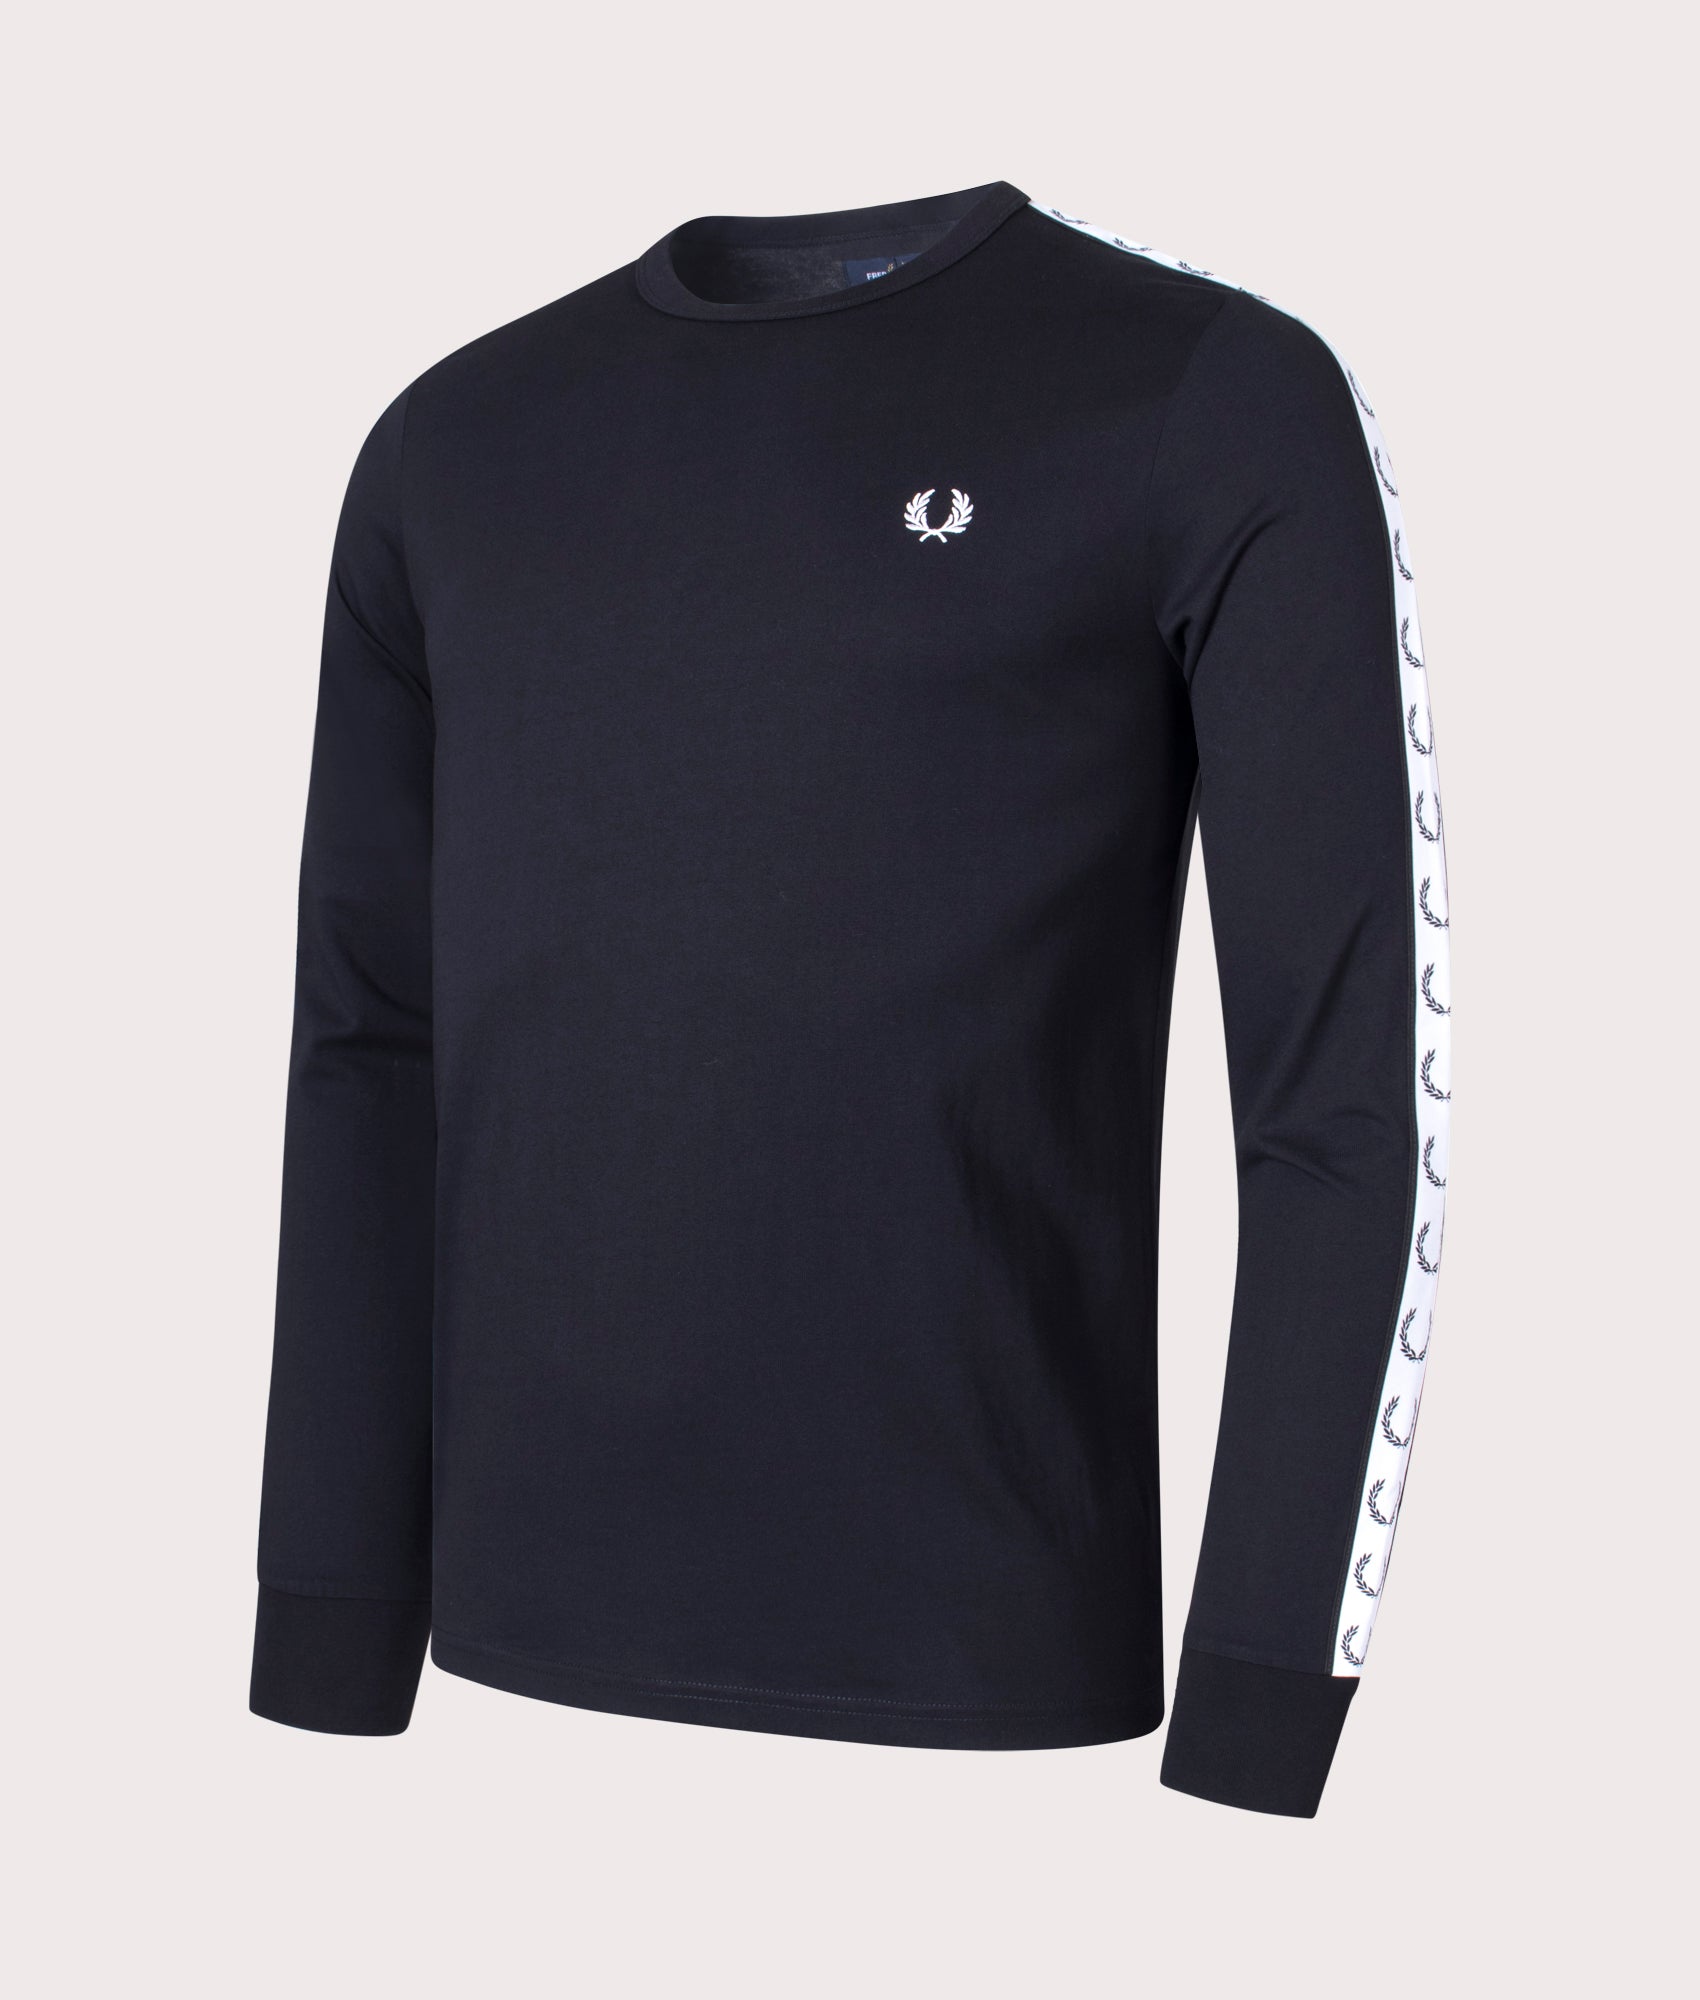 Fred Perry Mens Long Sleeve Taped T-Shirt - Colour: 102 Black - Size: Small